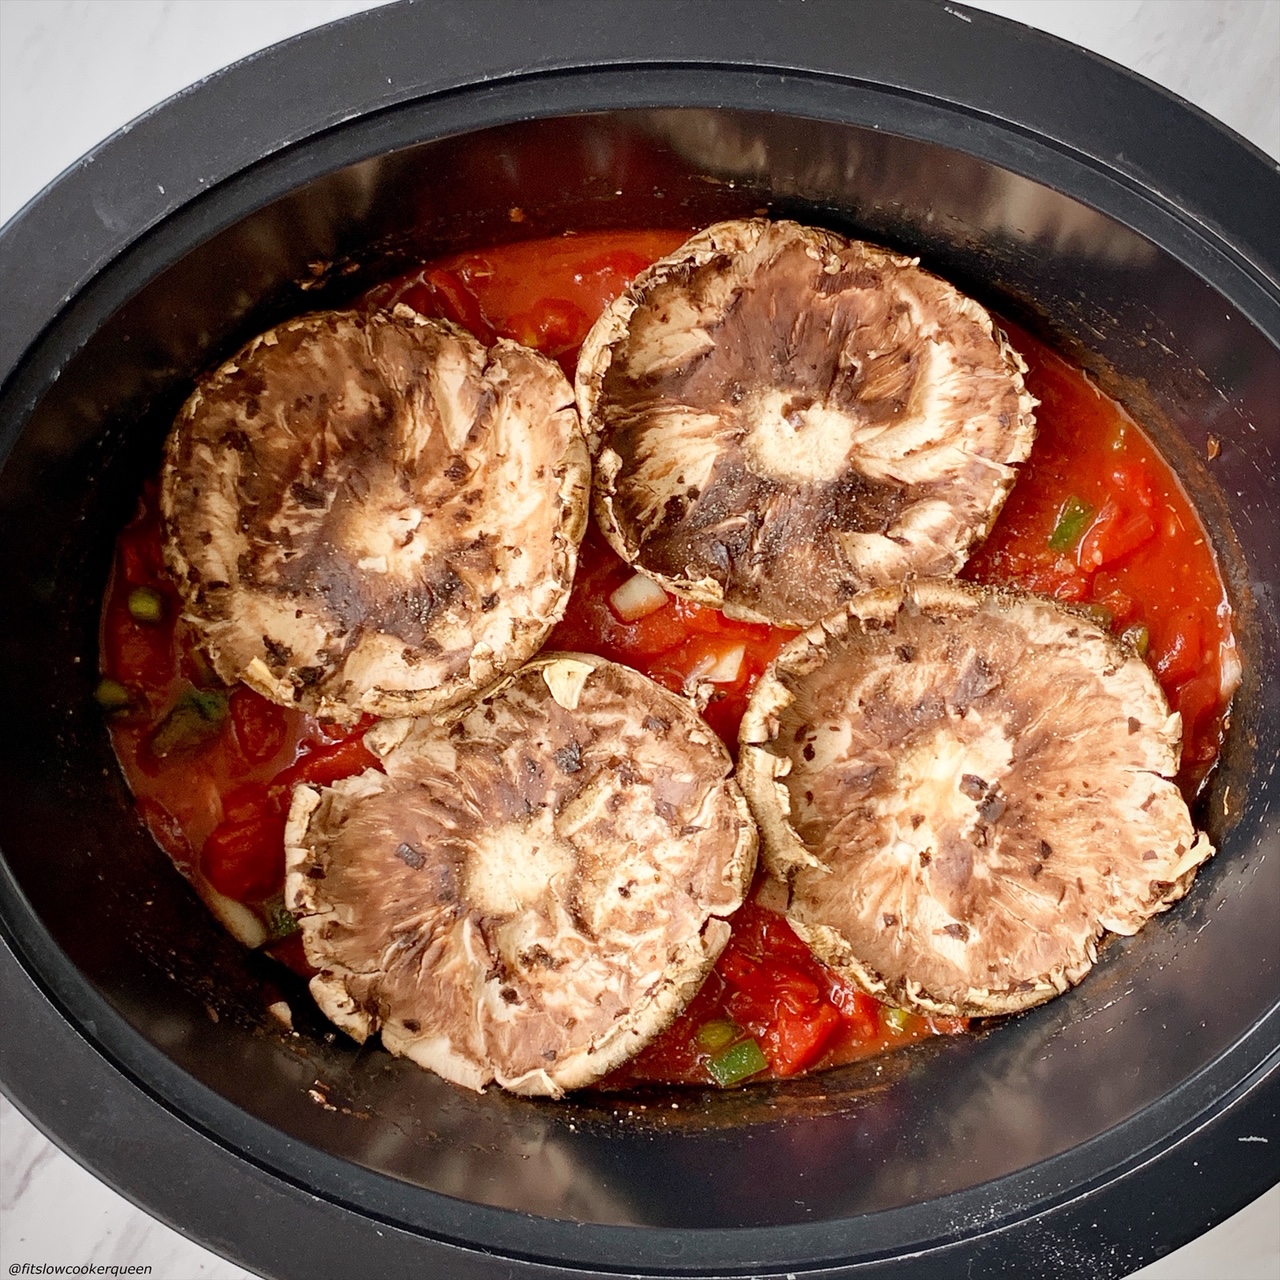 4 large portobello mushrooms in the slow cooker on top of tomato sauce